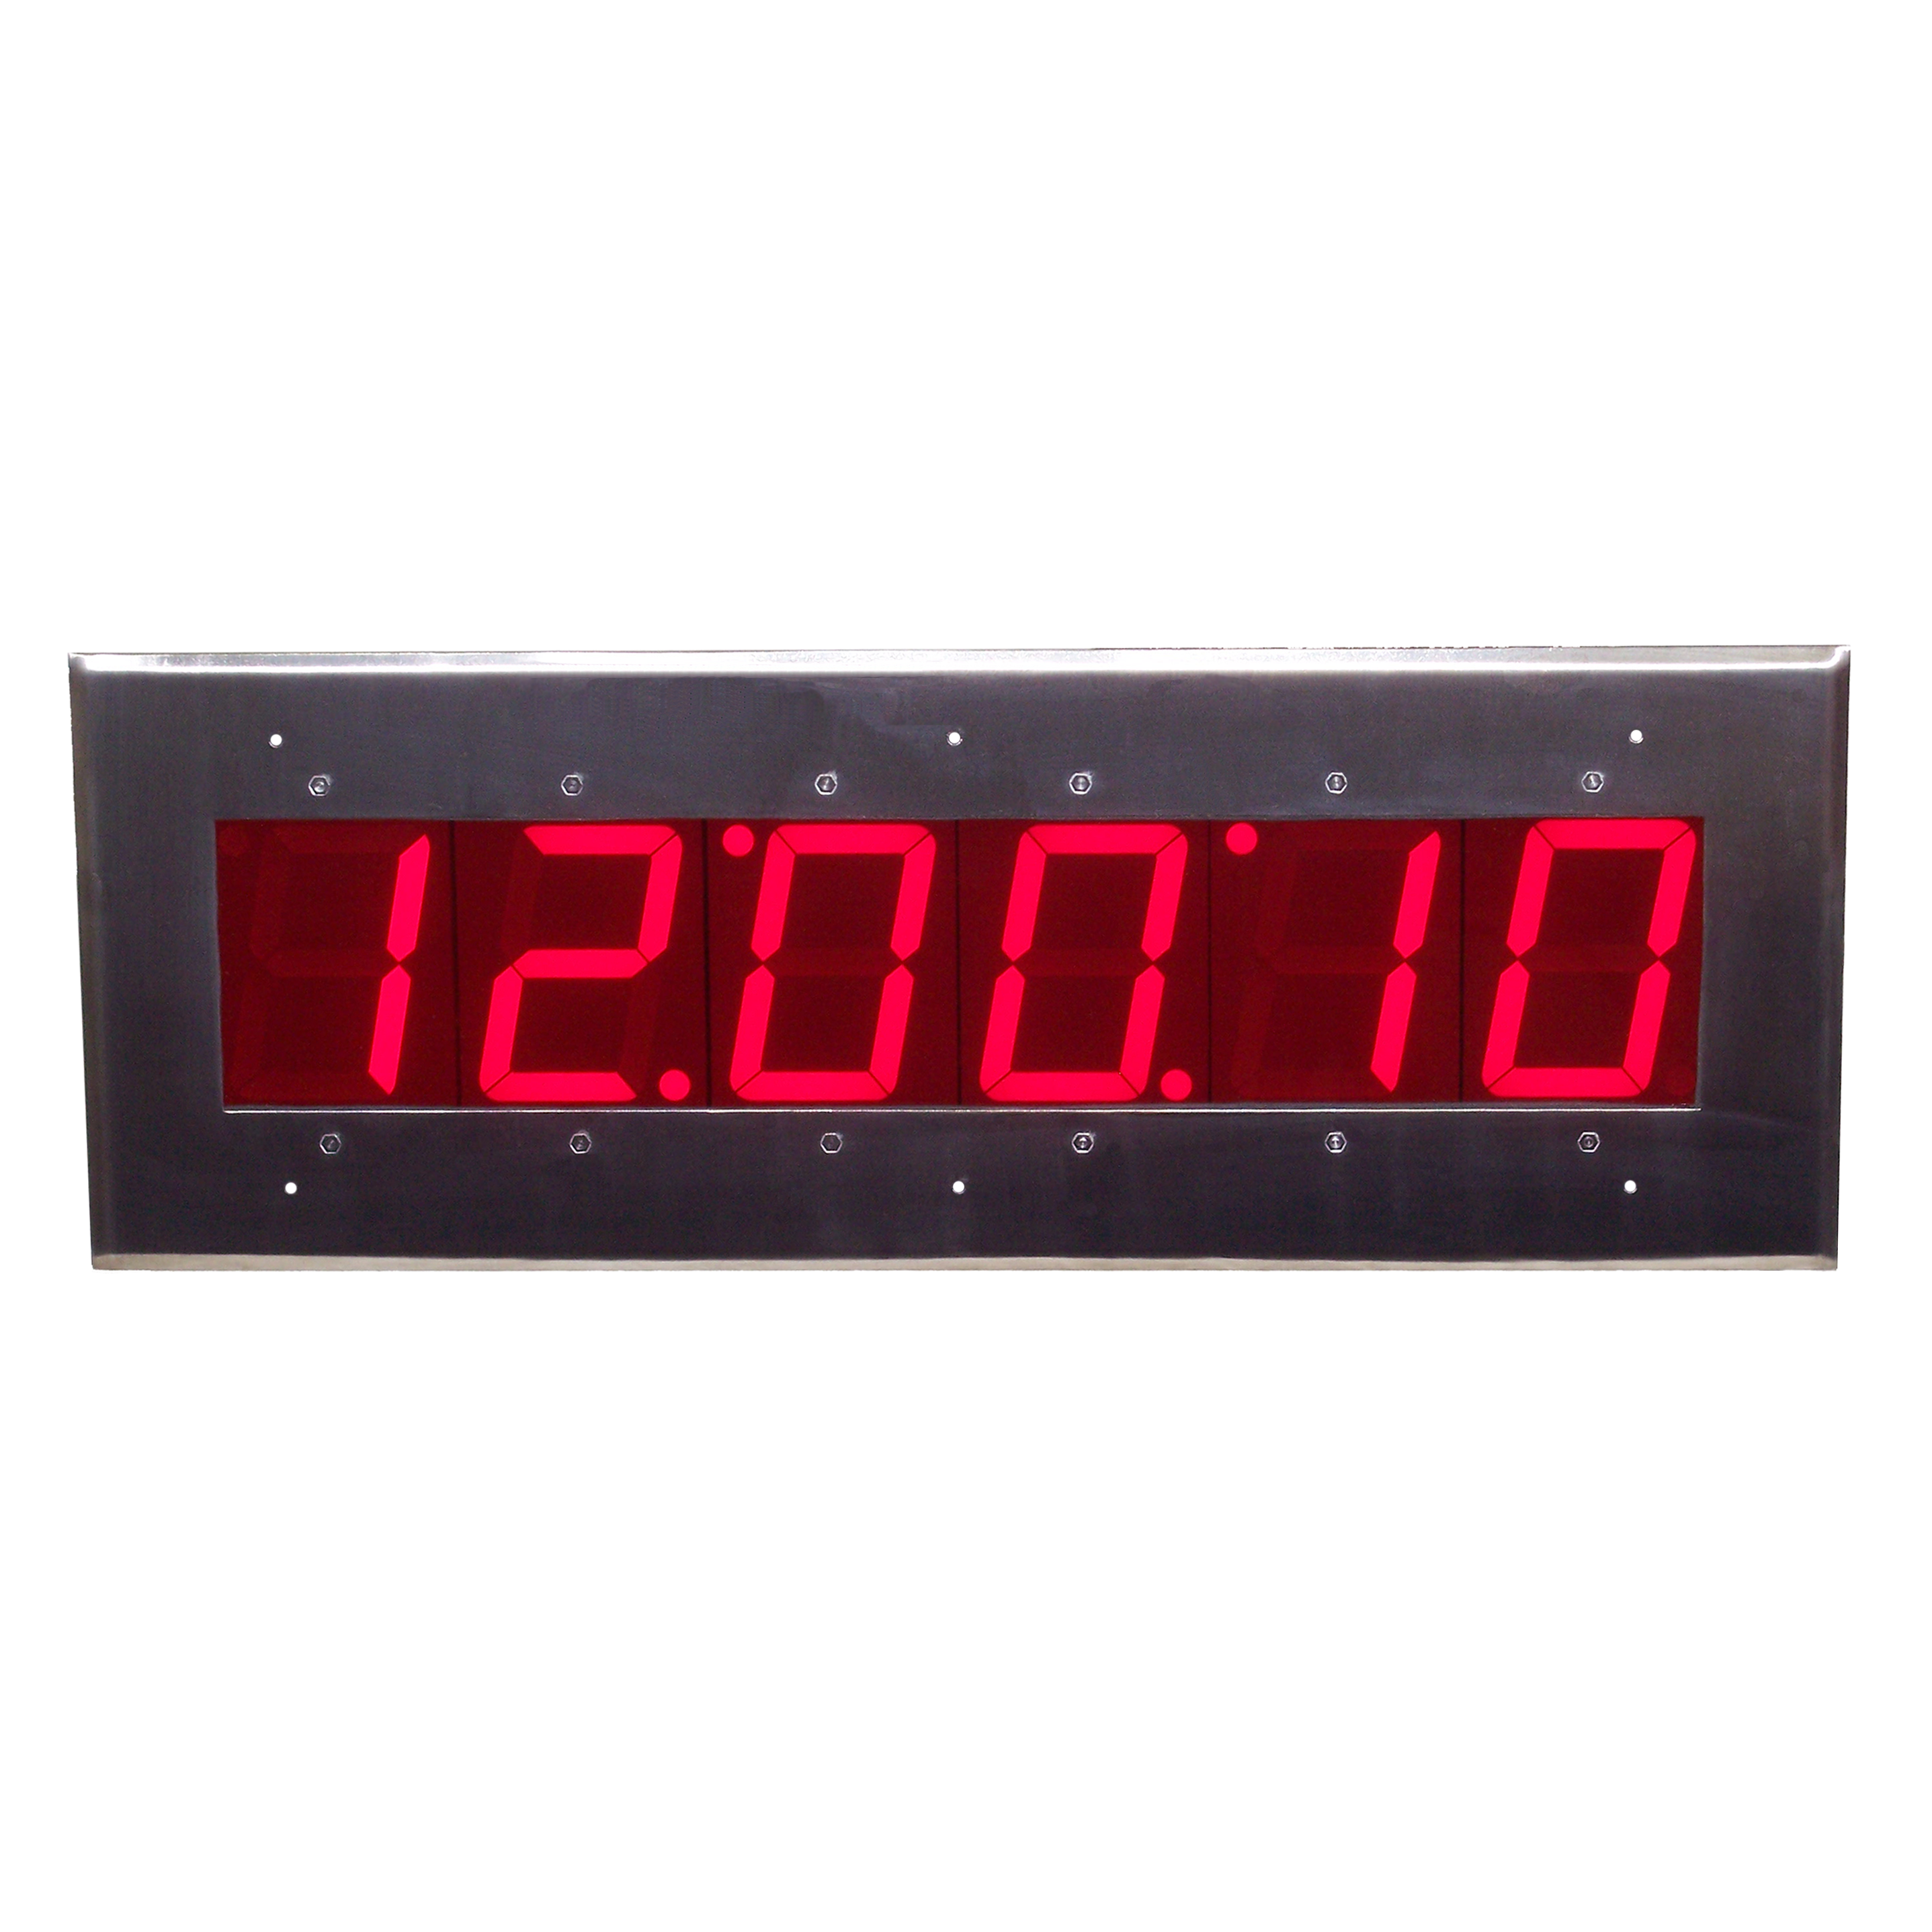 (DC-406N-POE-Flush-Stainless) Cleanroom, Operating Room, NTP-Network POE Powered, Digital LED Atomic Clock, (6)-4.0 Inch LED Digits, 316L Stainless Steel IP-66 Flush Mount Enclosure